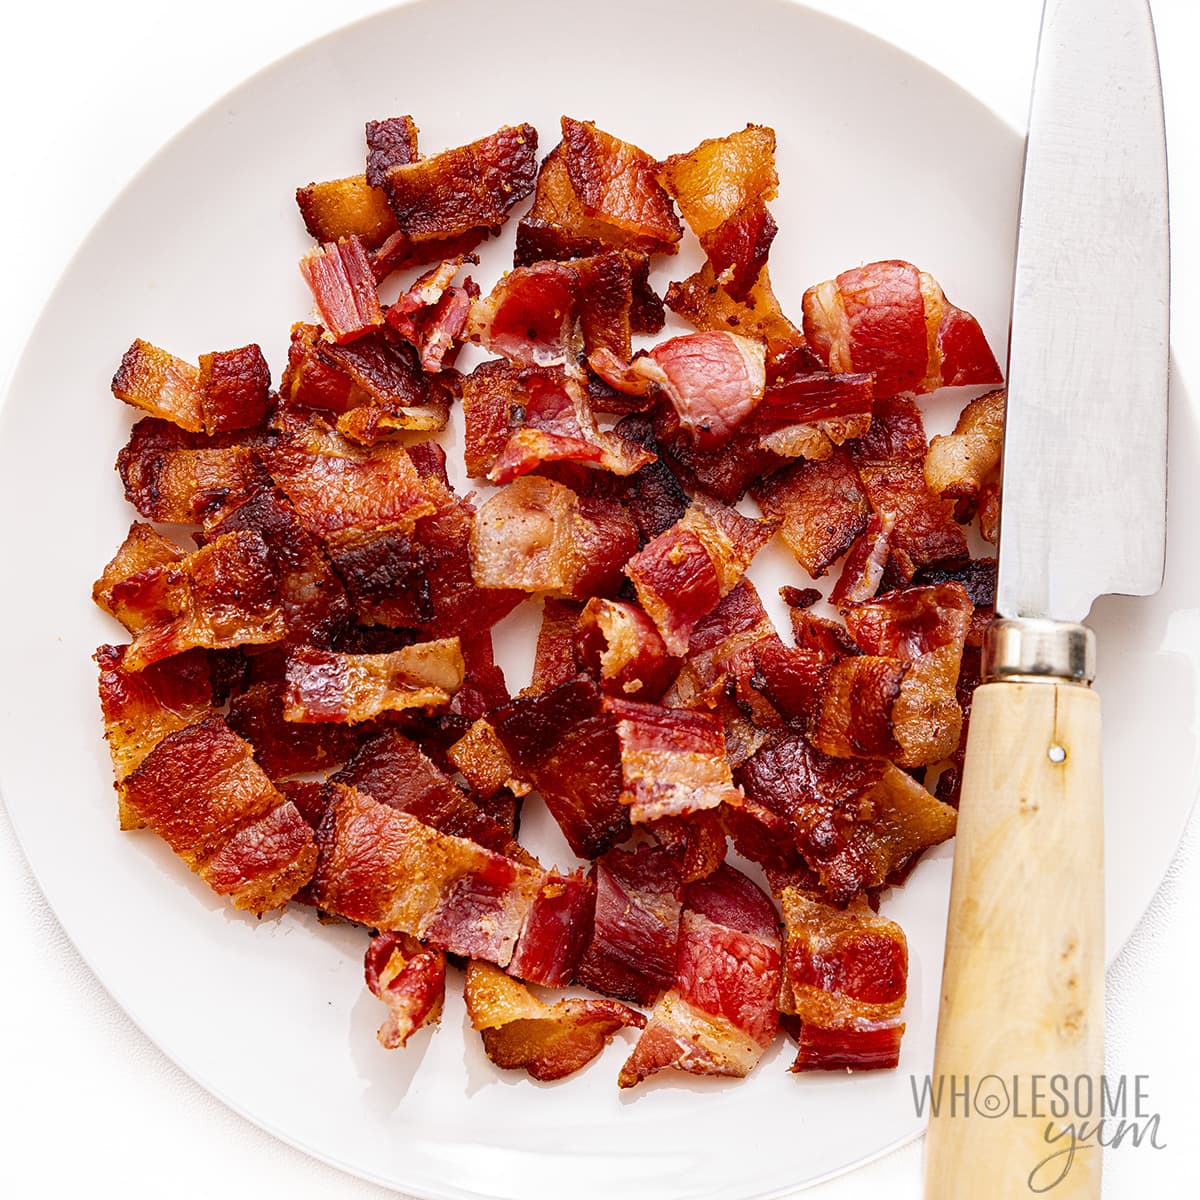 Place chopped bacon on a plate.